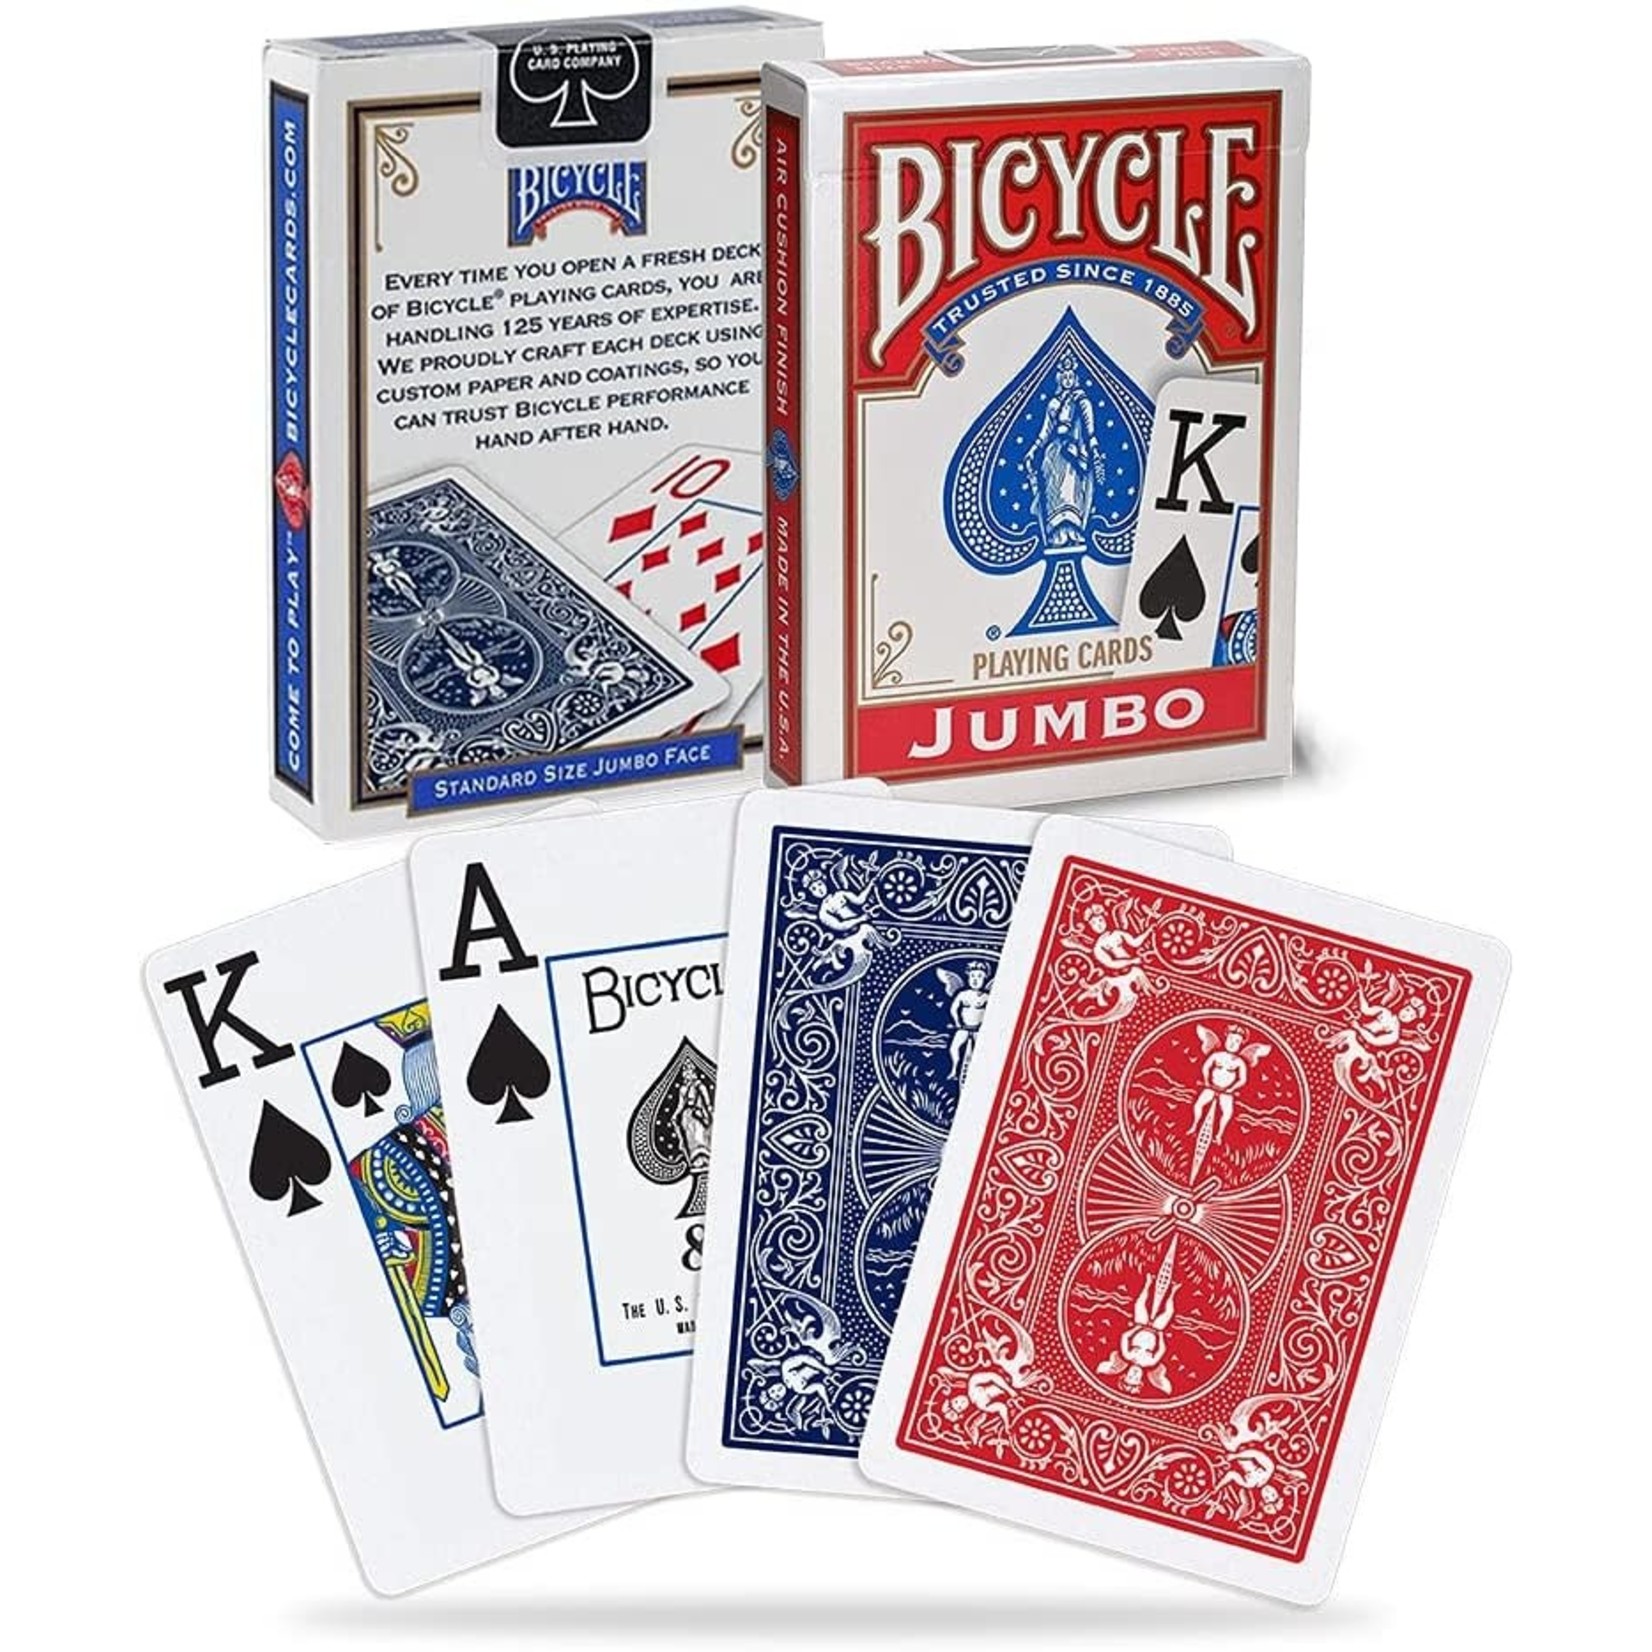 Bicycle Bicycle Playing Cards: Jumbo Index Size